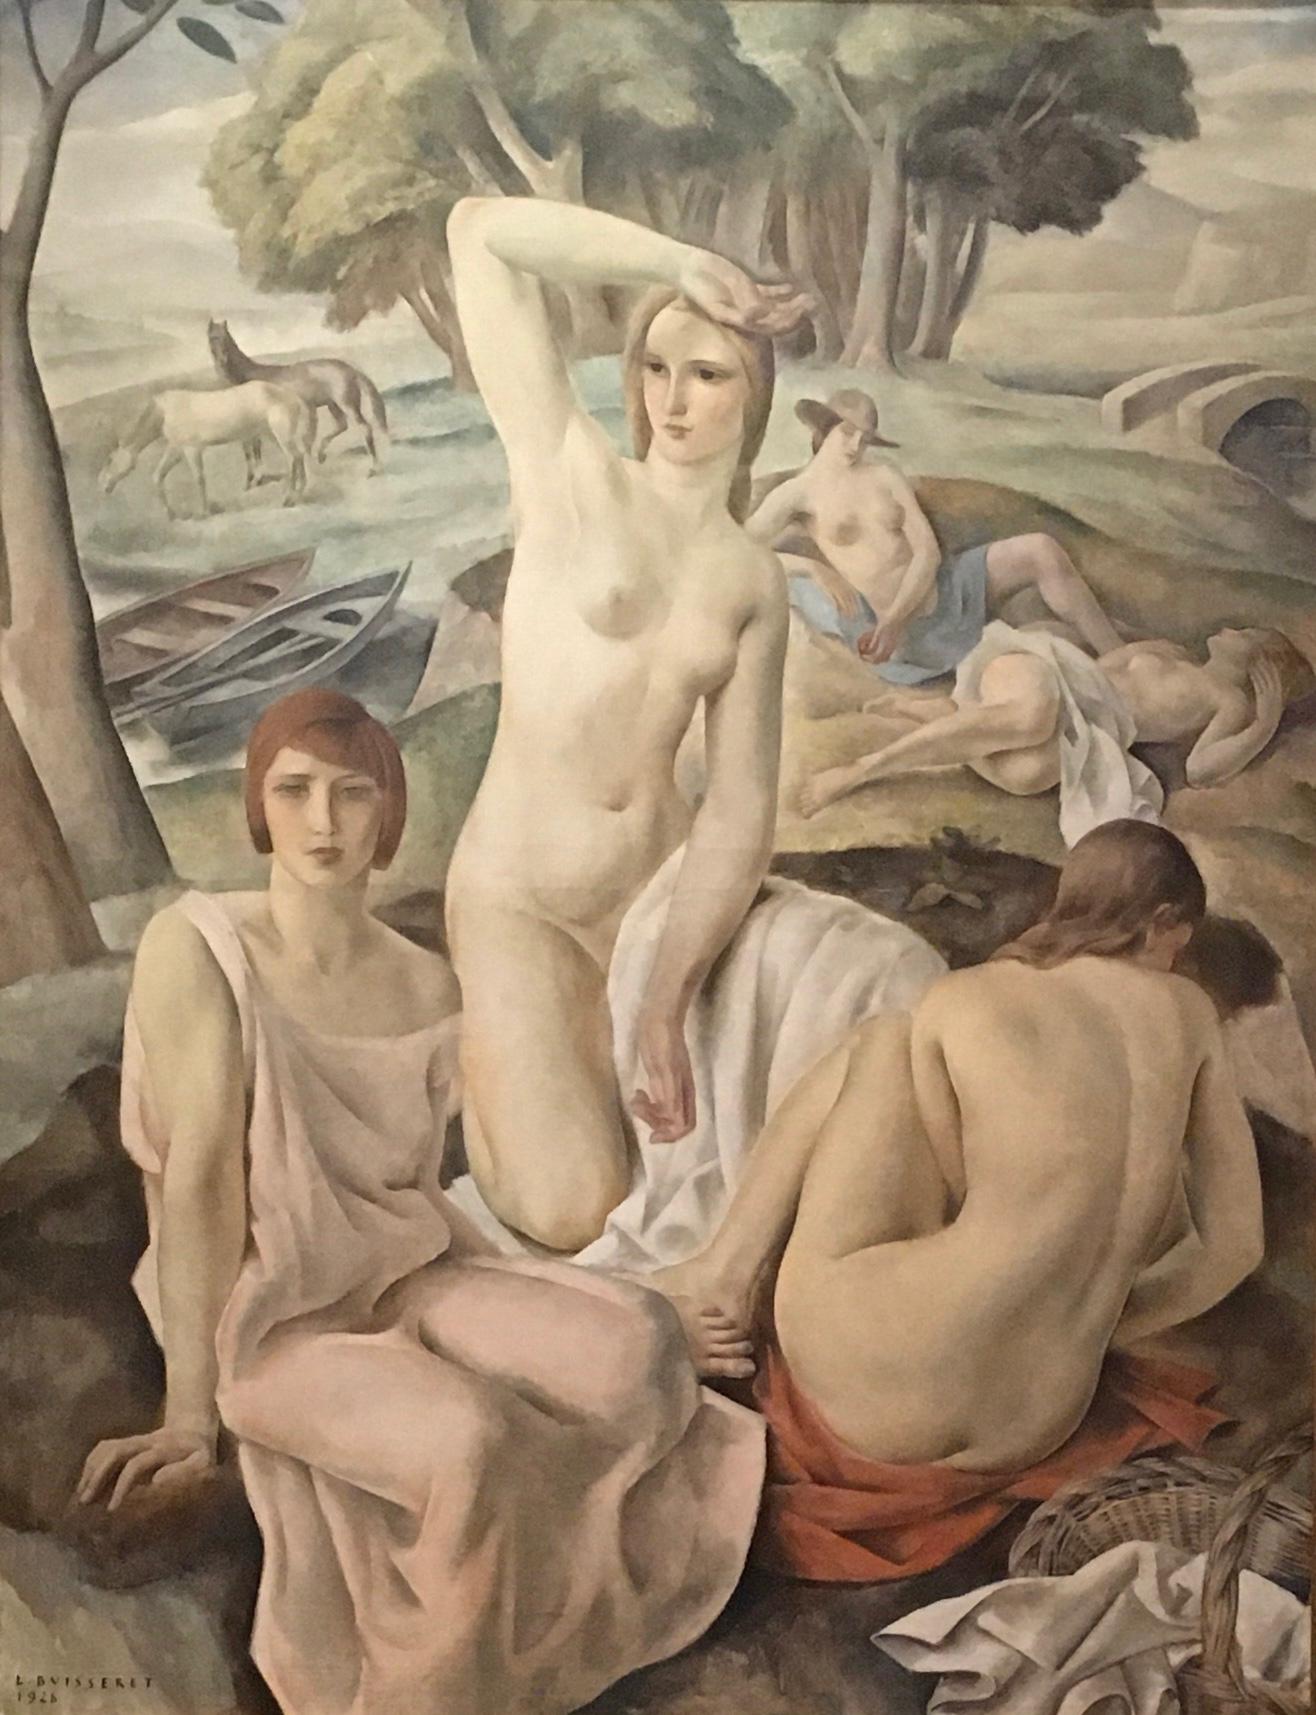 Composition (Nude Women in Surreal Landscape with Horses & Boats)